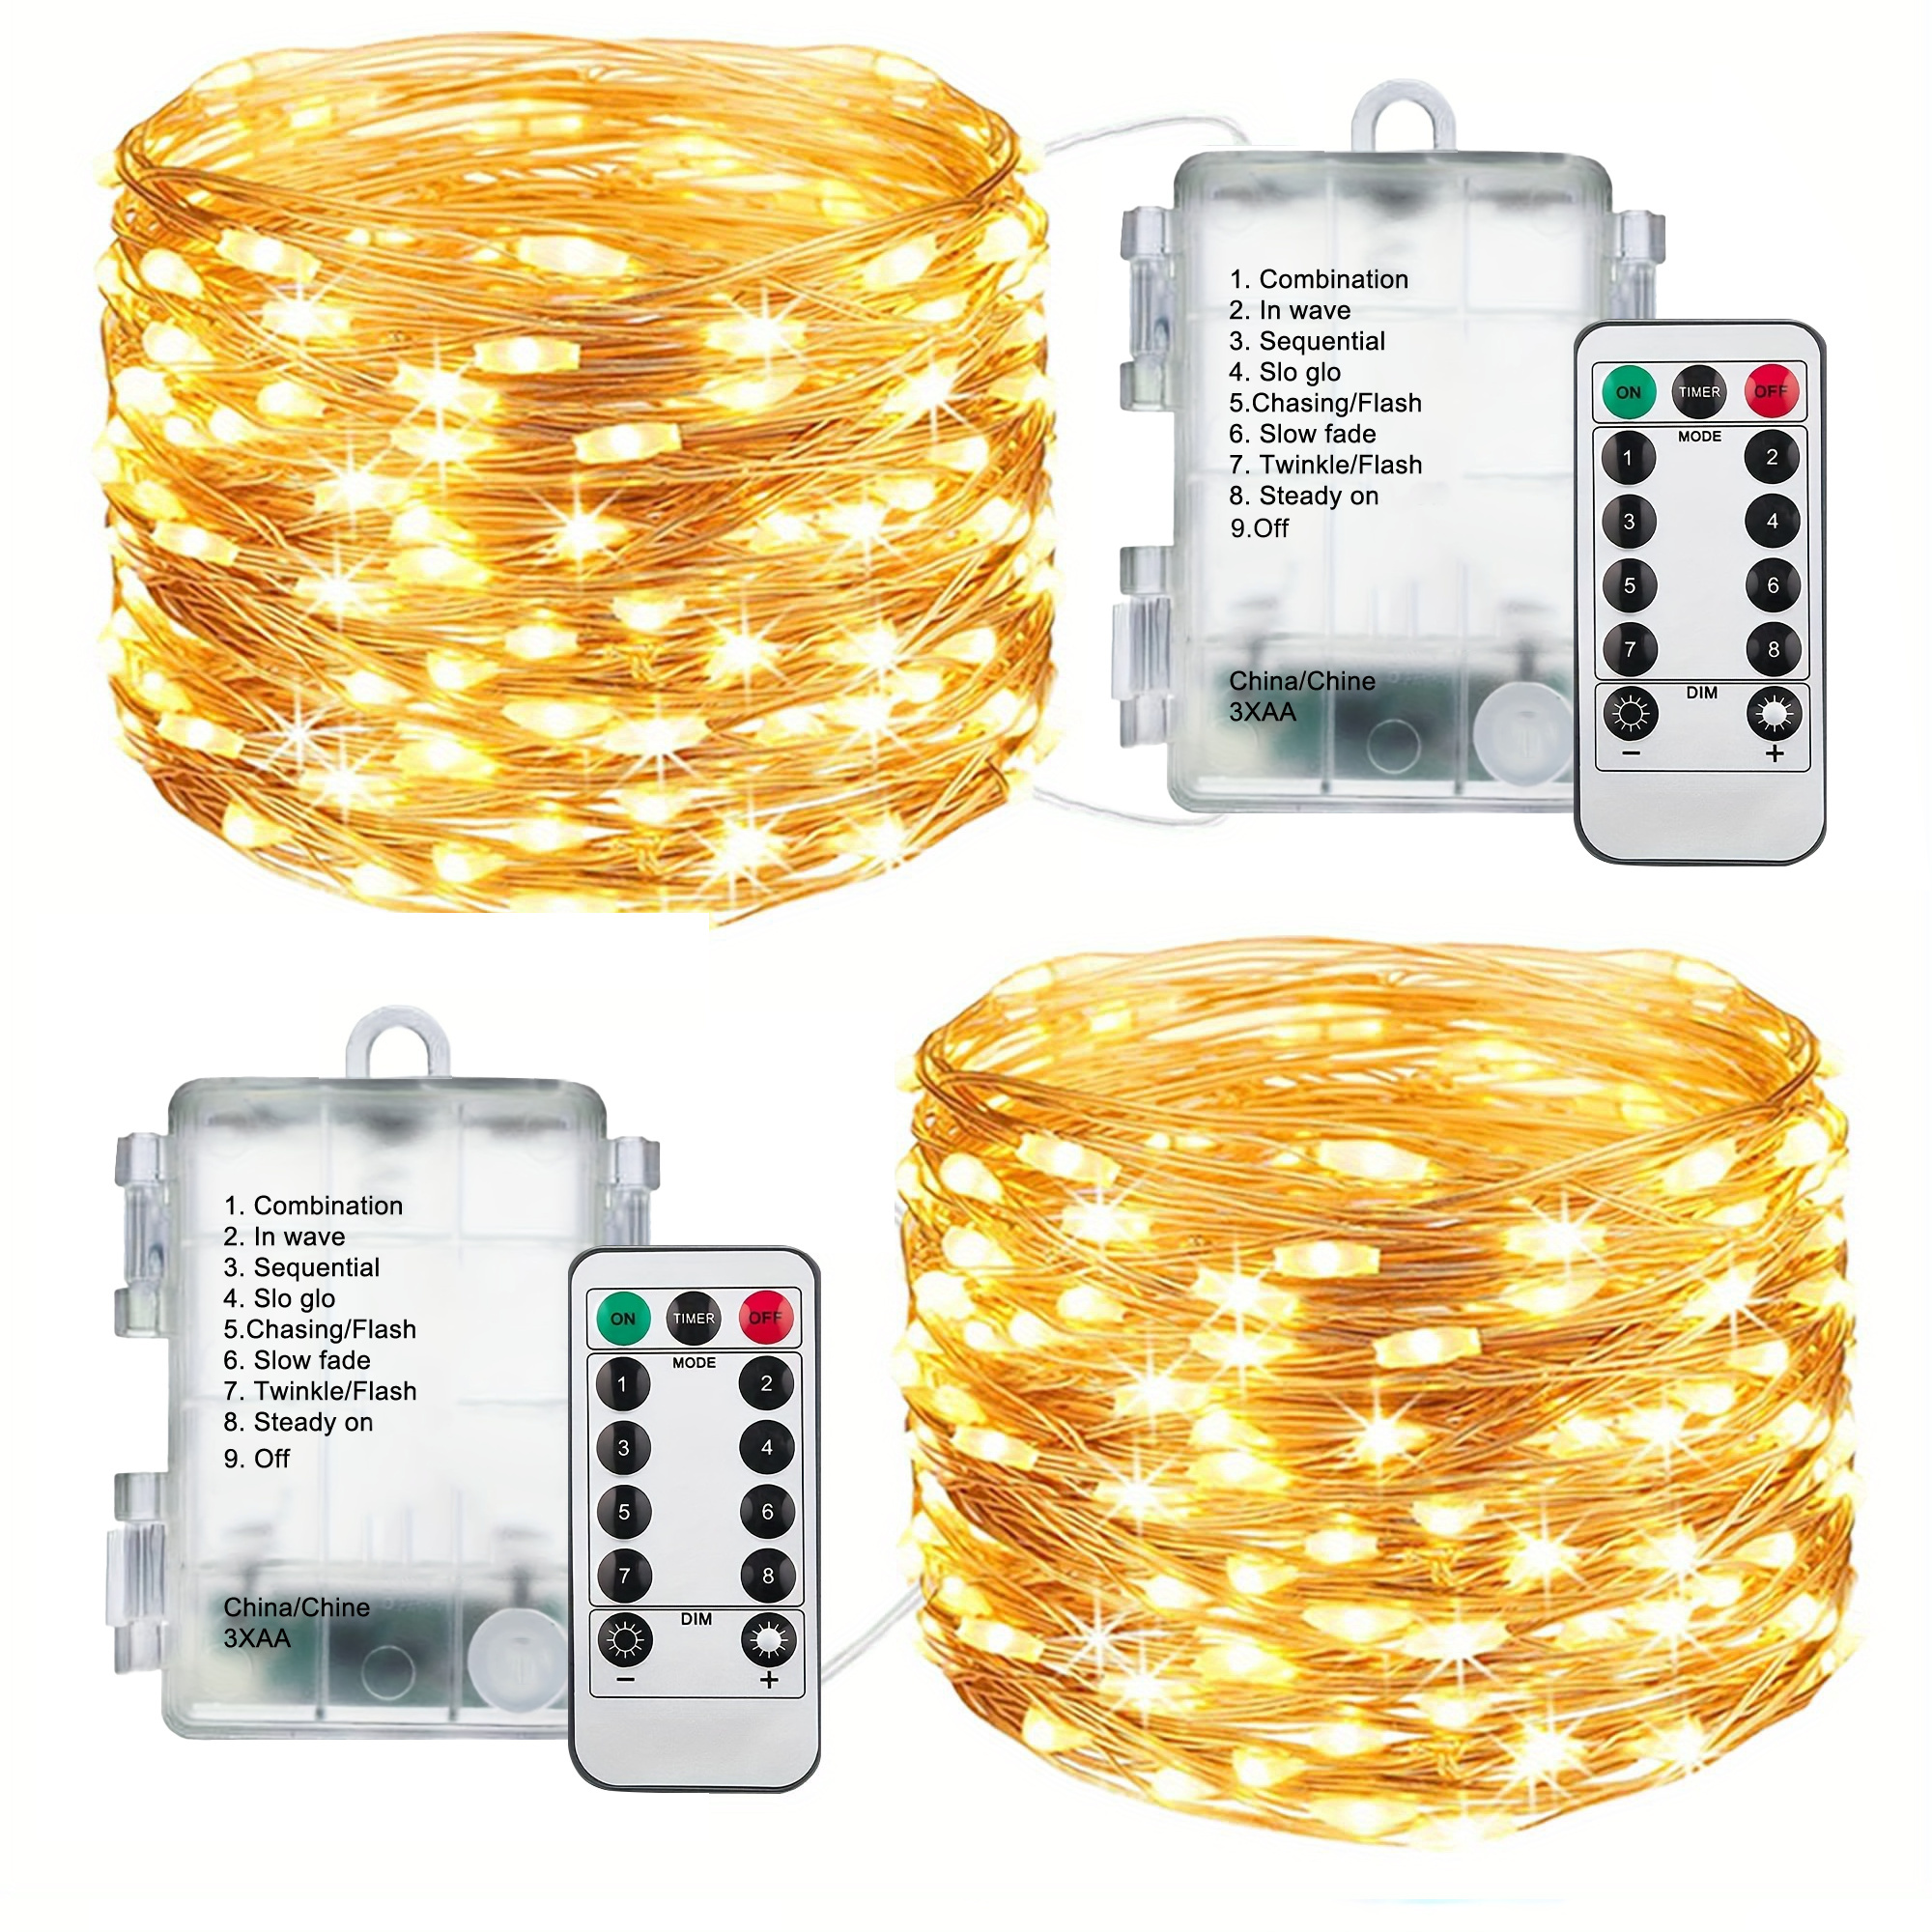 2 pack 32 8ft 100led fairy lights battery operated with remote control timer 8 modes waterproof copper wire twinkle string lights christmas lights for bedroom party indoor warm white multicolor cool white details 0